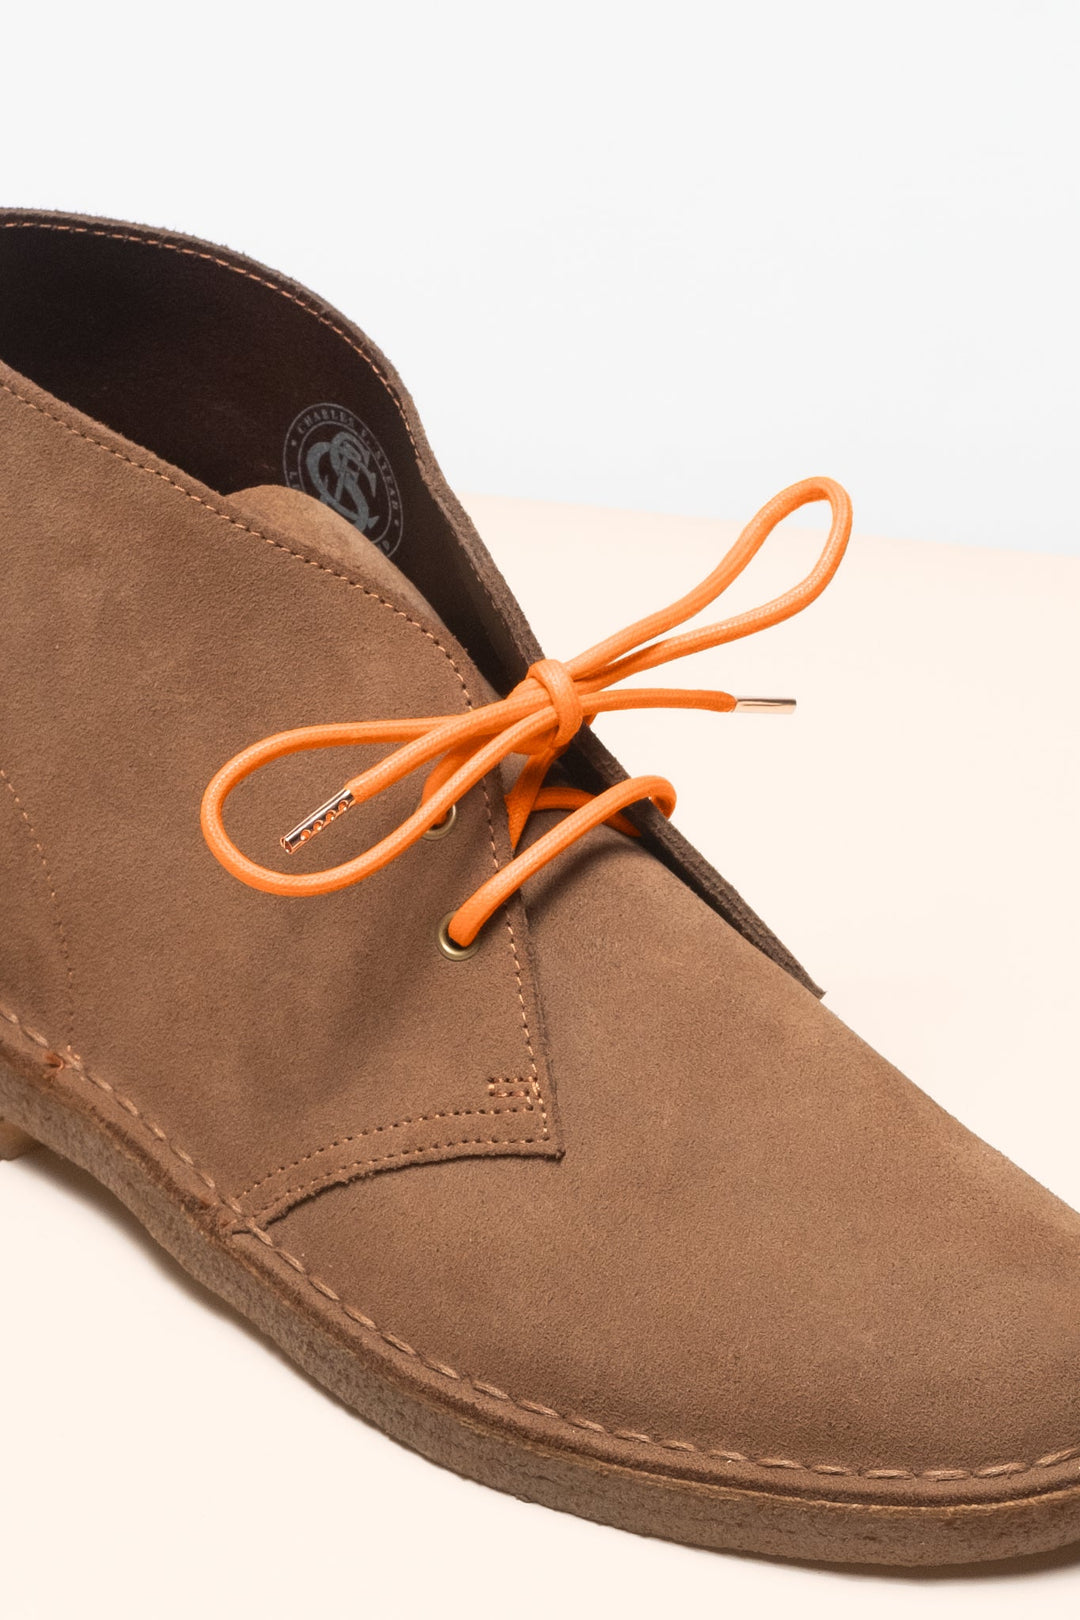 Buckthorn - 4mm round waxed shoelaces for boots and shoes made from 100% organic cotton - Senkels